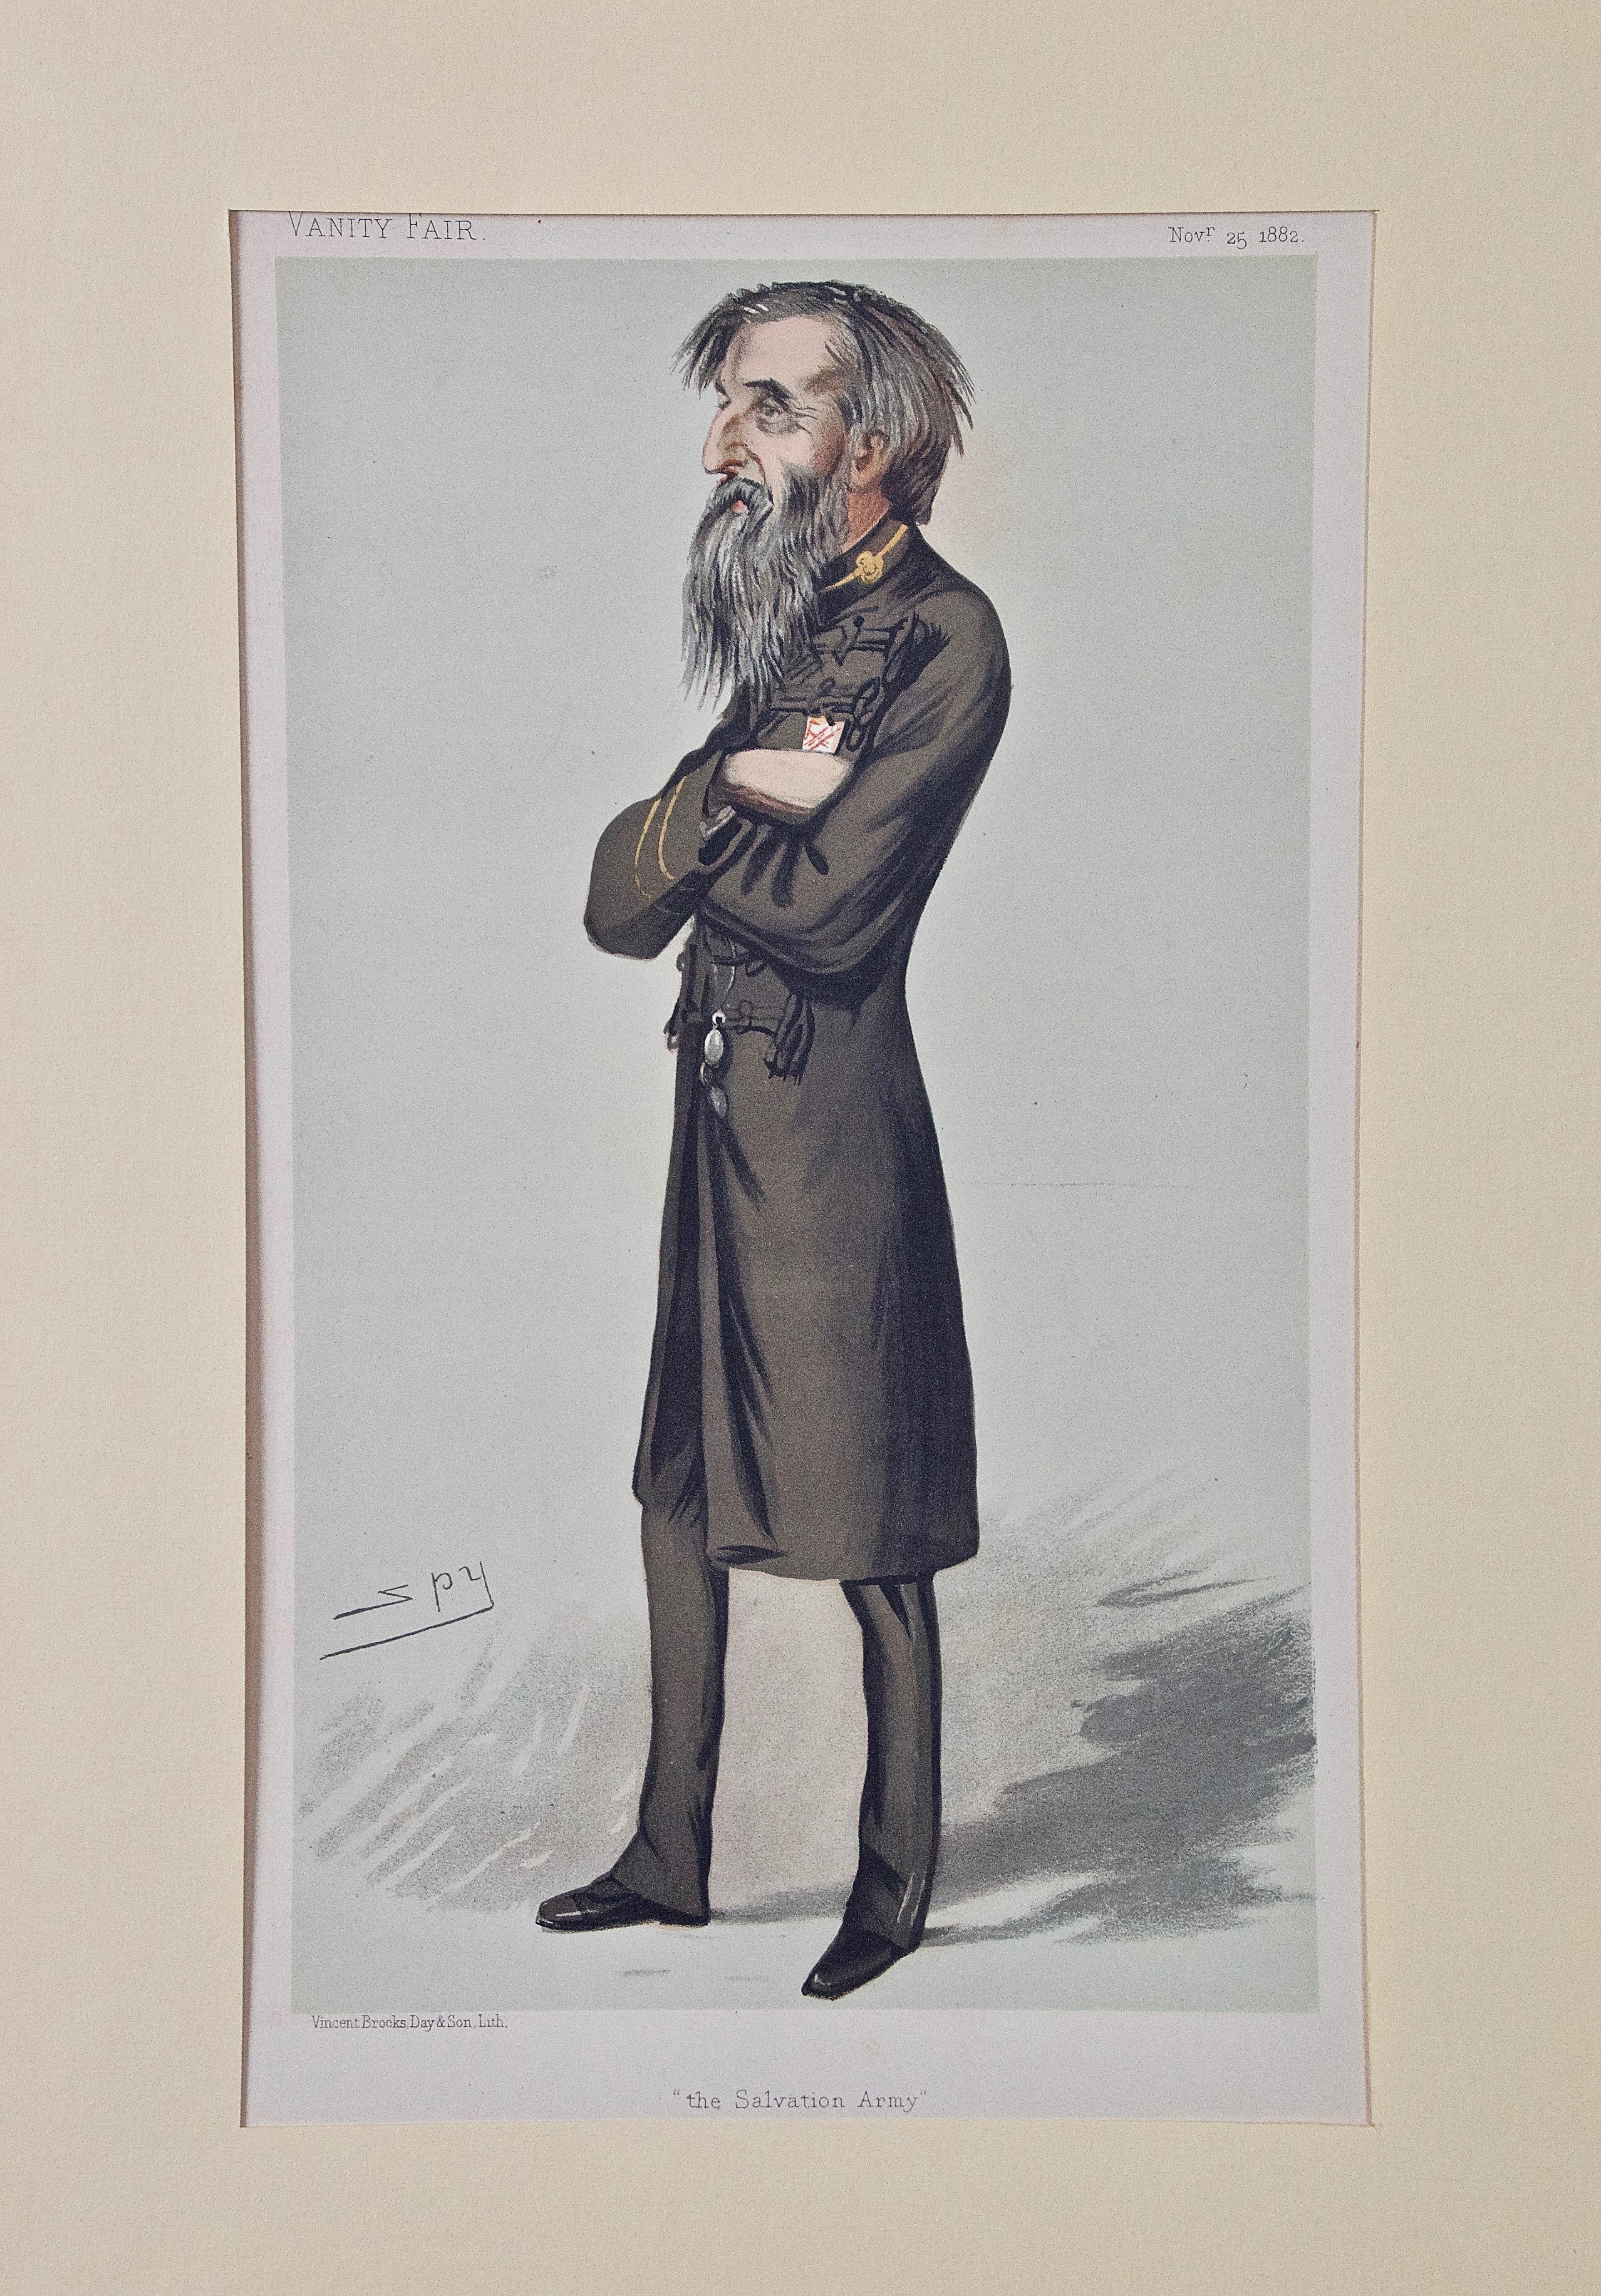 William Booth, Founder of "The Salvation Army": A 19th C. Vanity Fair Caricature